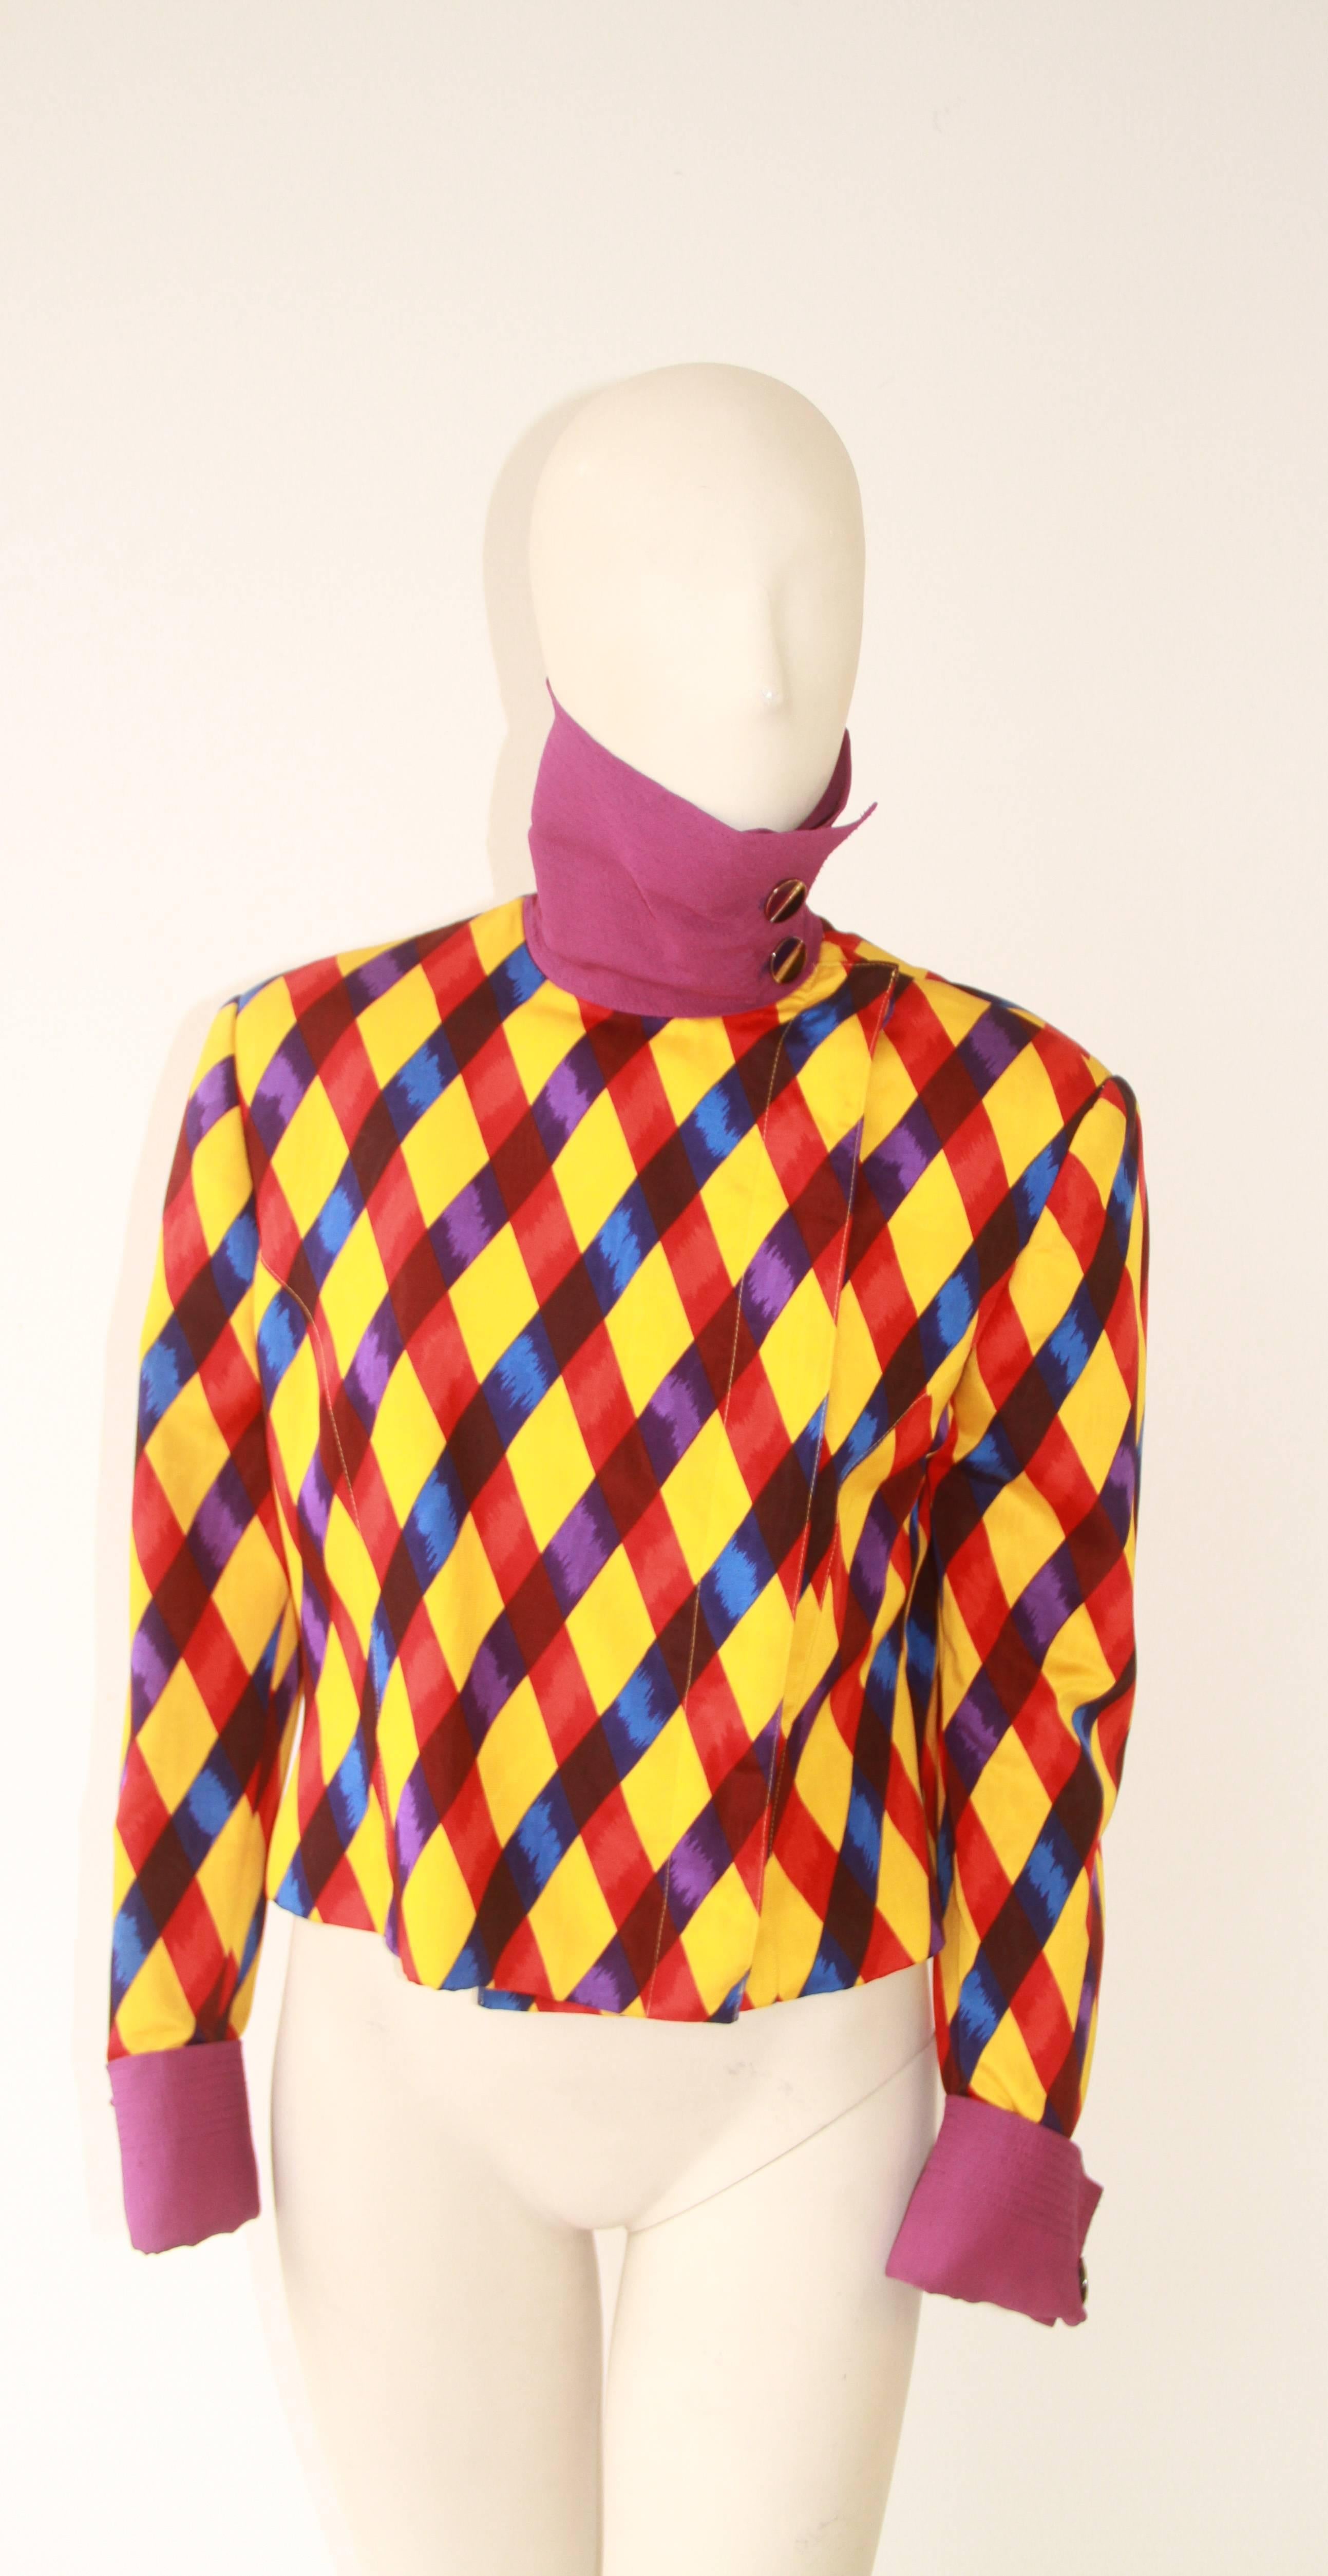 Rare Gianni Versace harlequin printed jacket, with contrast cuffs and collar, from the Spring 1990 collection.

The collar can either be worn folded over, or up as in image 2.

Unmarked, however, sizing is equivalent to an Italian size